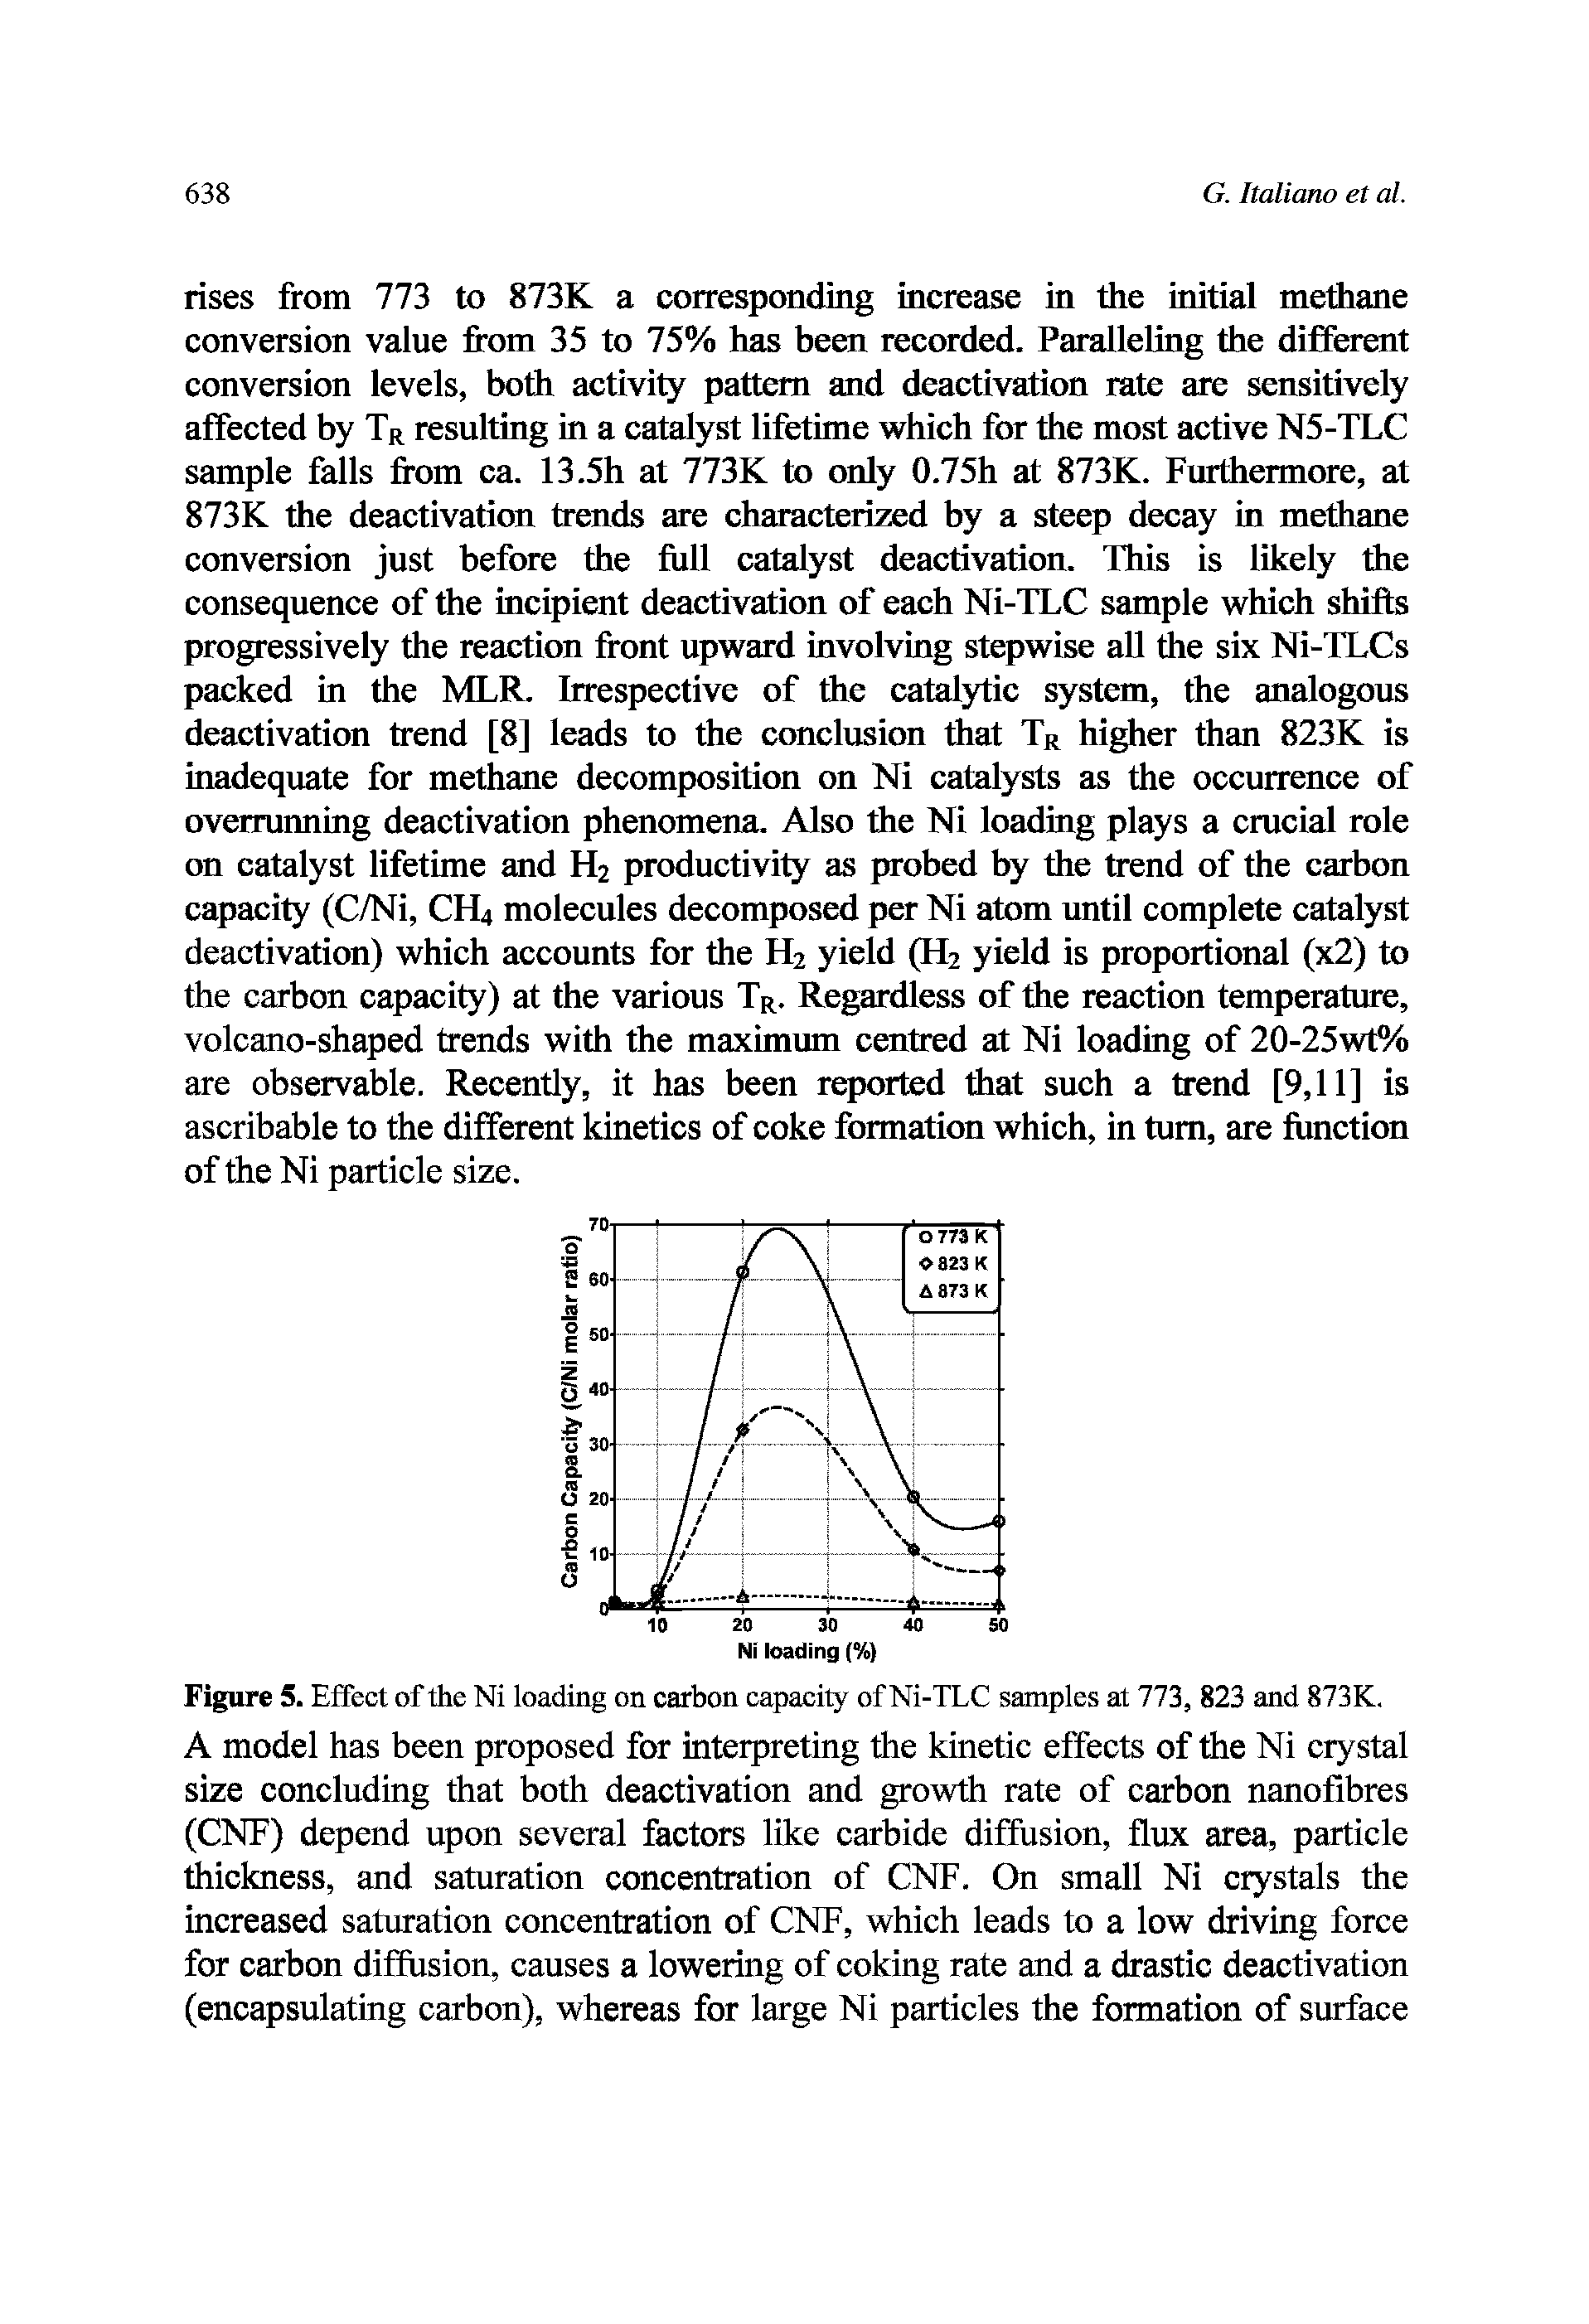 Figure 5. Effect of the Ni loading on carbon capacity of Ni-TLC samples at 773, 823 and 873K. A model has been proposed for interpreting the kinetic effects of the Ni crystal size concluding that both deactivation and growth rate of carbon nanofibres (CNF) depend upon several factors like carbide diffusion, flux area, particle thickness, and saturation concentration of CNF. On small Ni crystals the increased saturation concentration of CNF, which leads to a low driving force for carbon diffusion, causes a lowering of coking rate and a drastic deactivation (encapsulating carbon), whereas for large Ni particles the formation of surface...